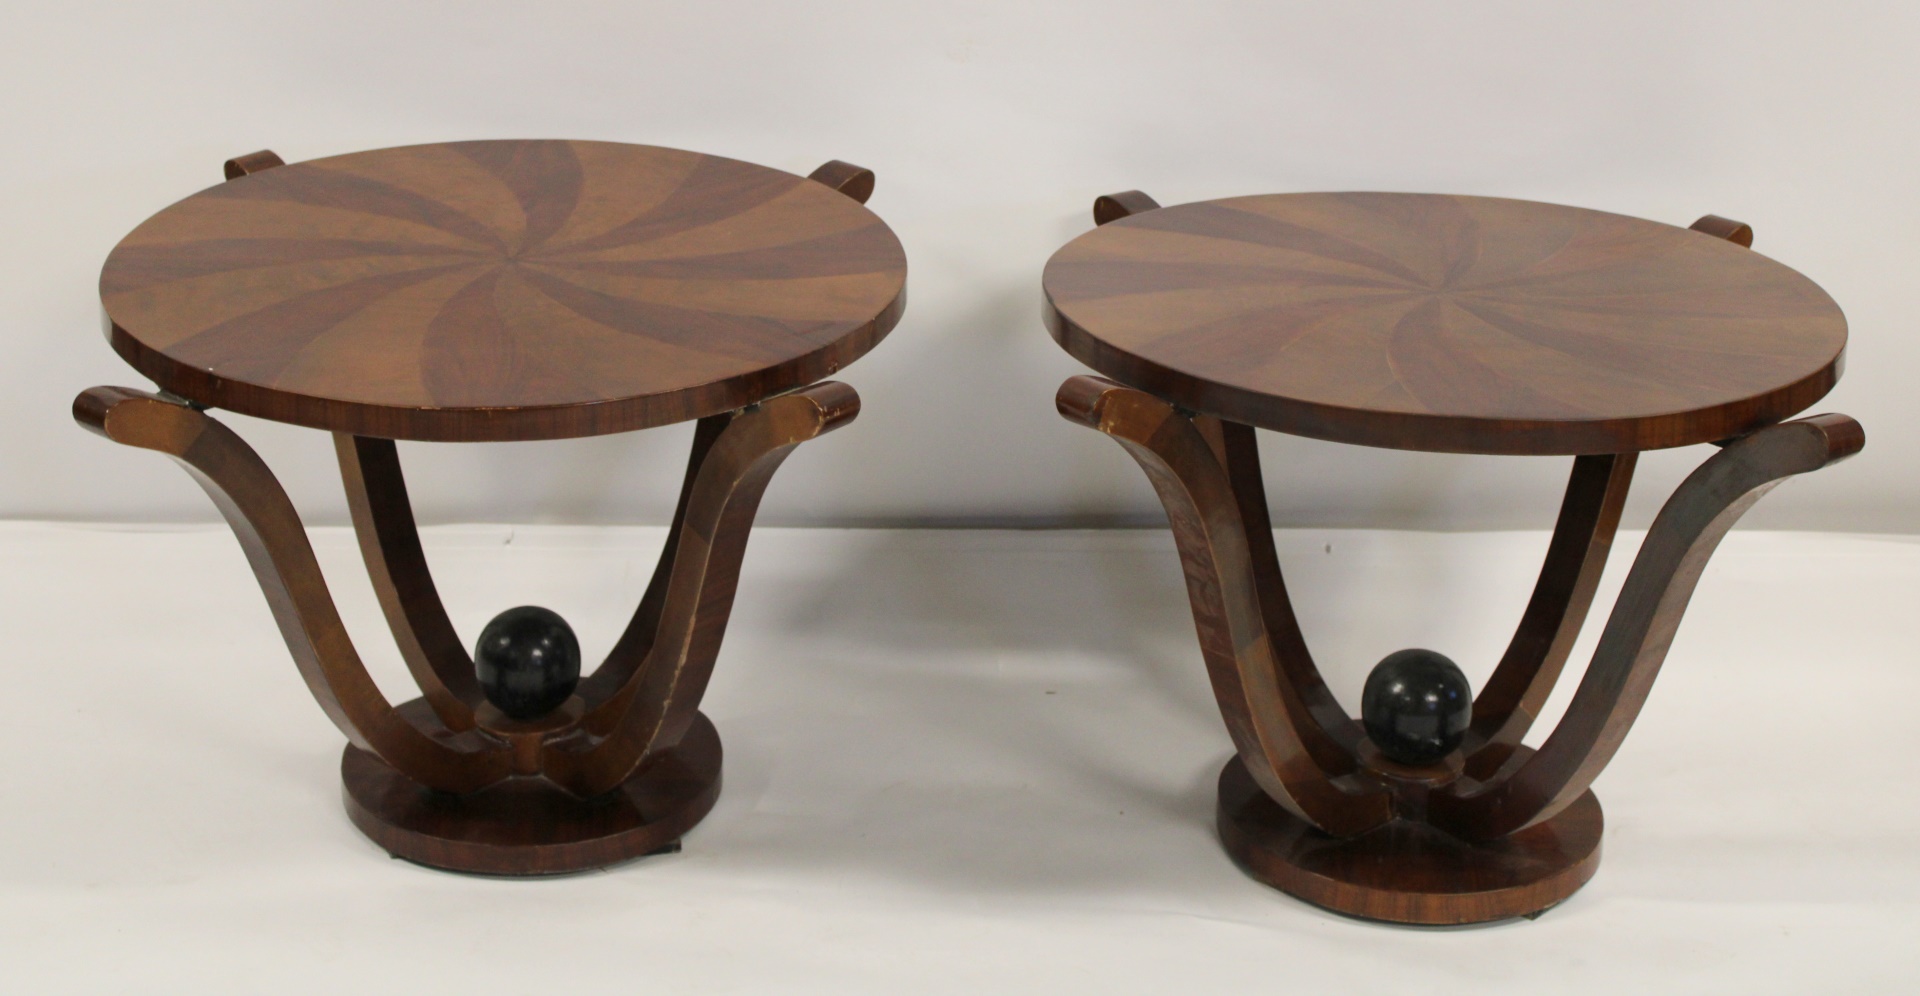 A PAIR OF ART DECO STYLE TABLES 3b90a2